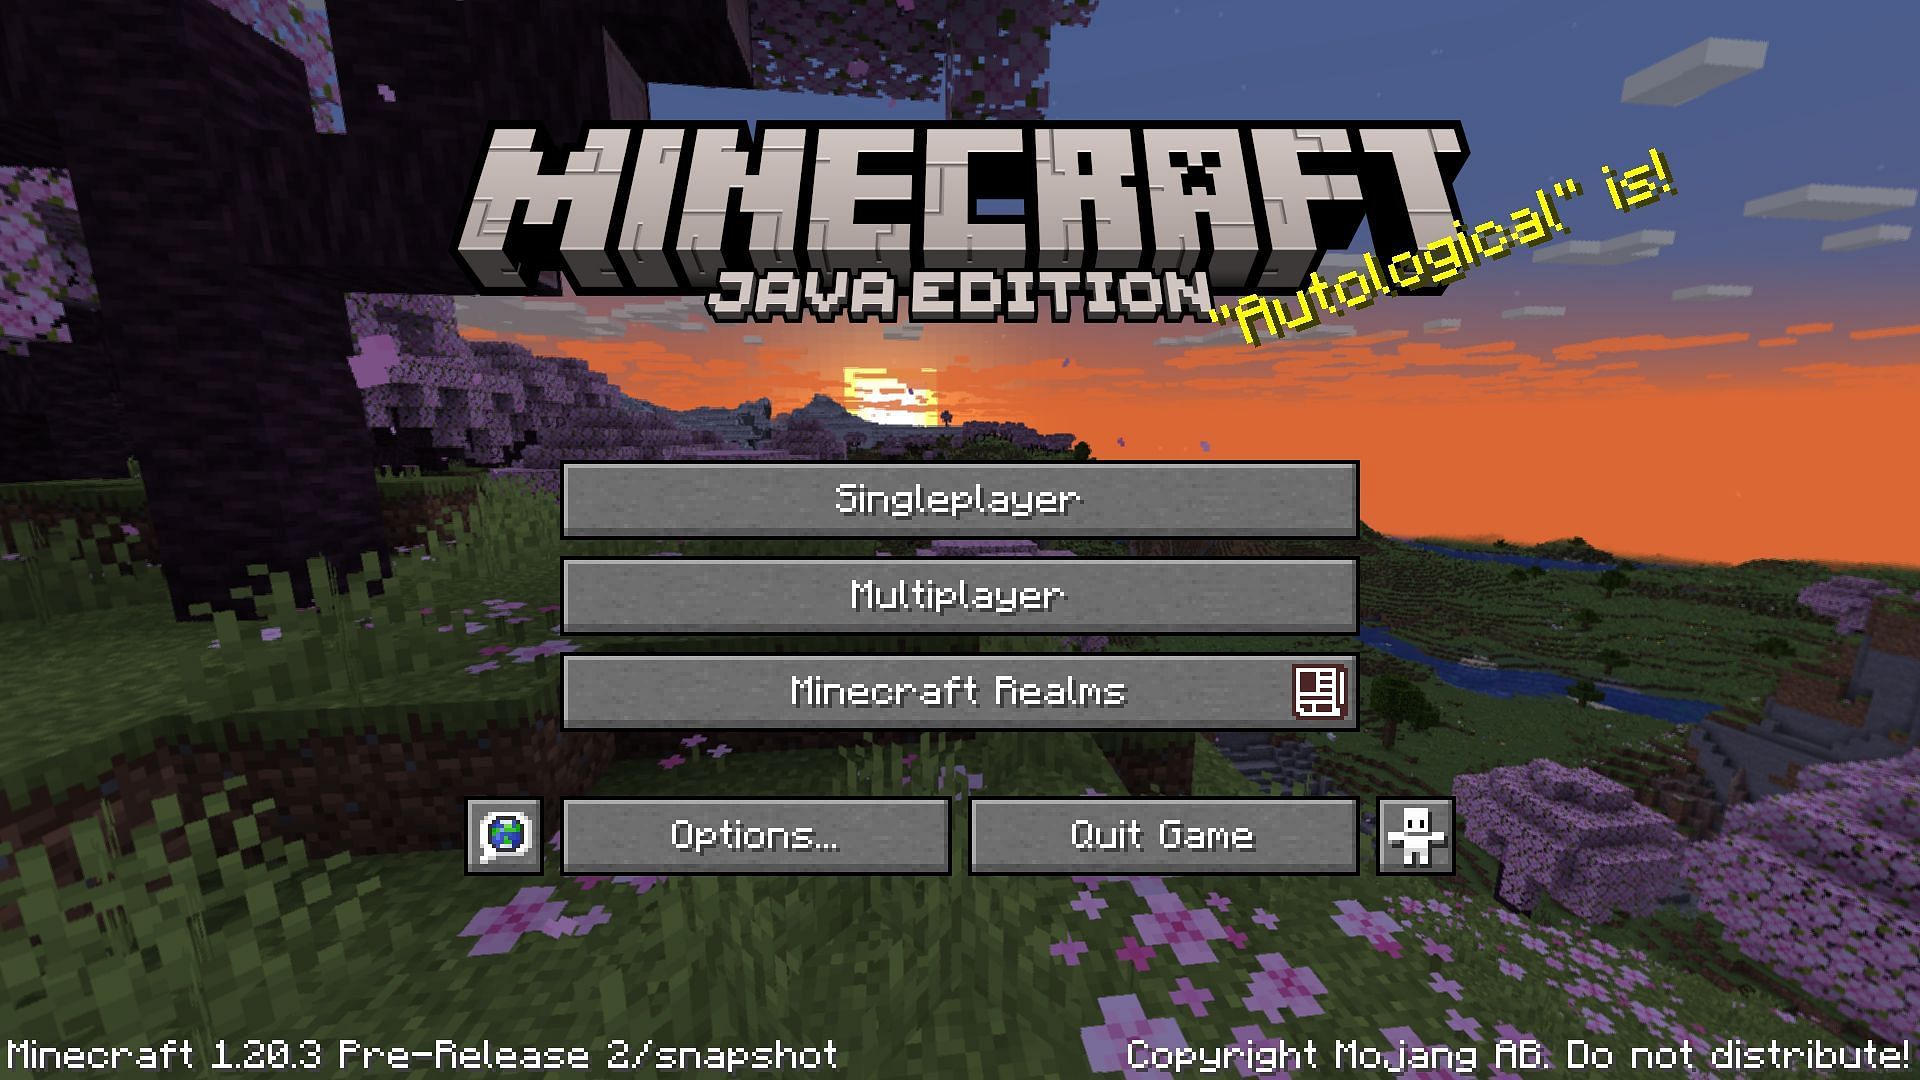 How to download Minecraft 1.20 pre-release 2